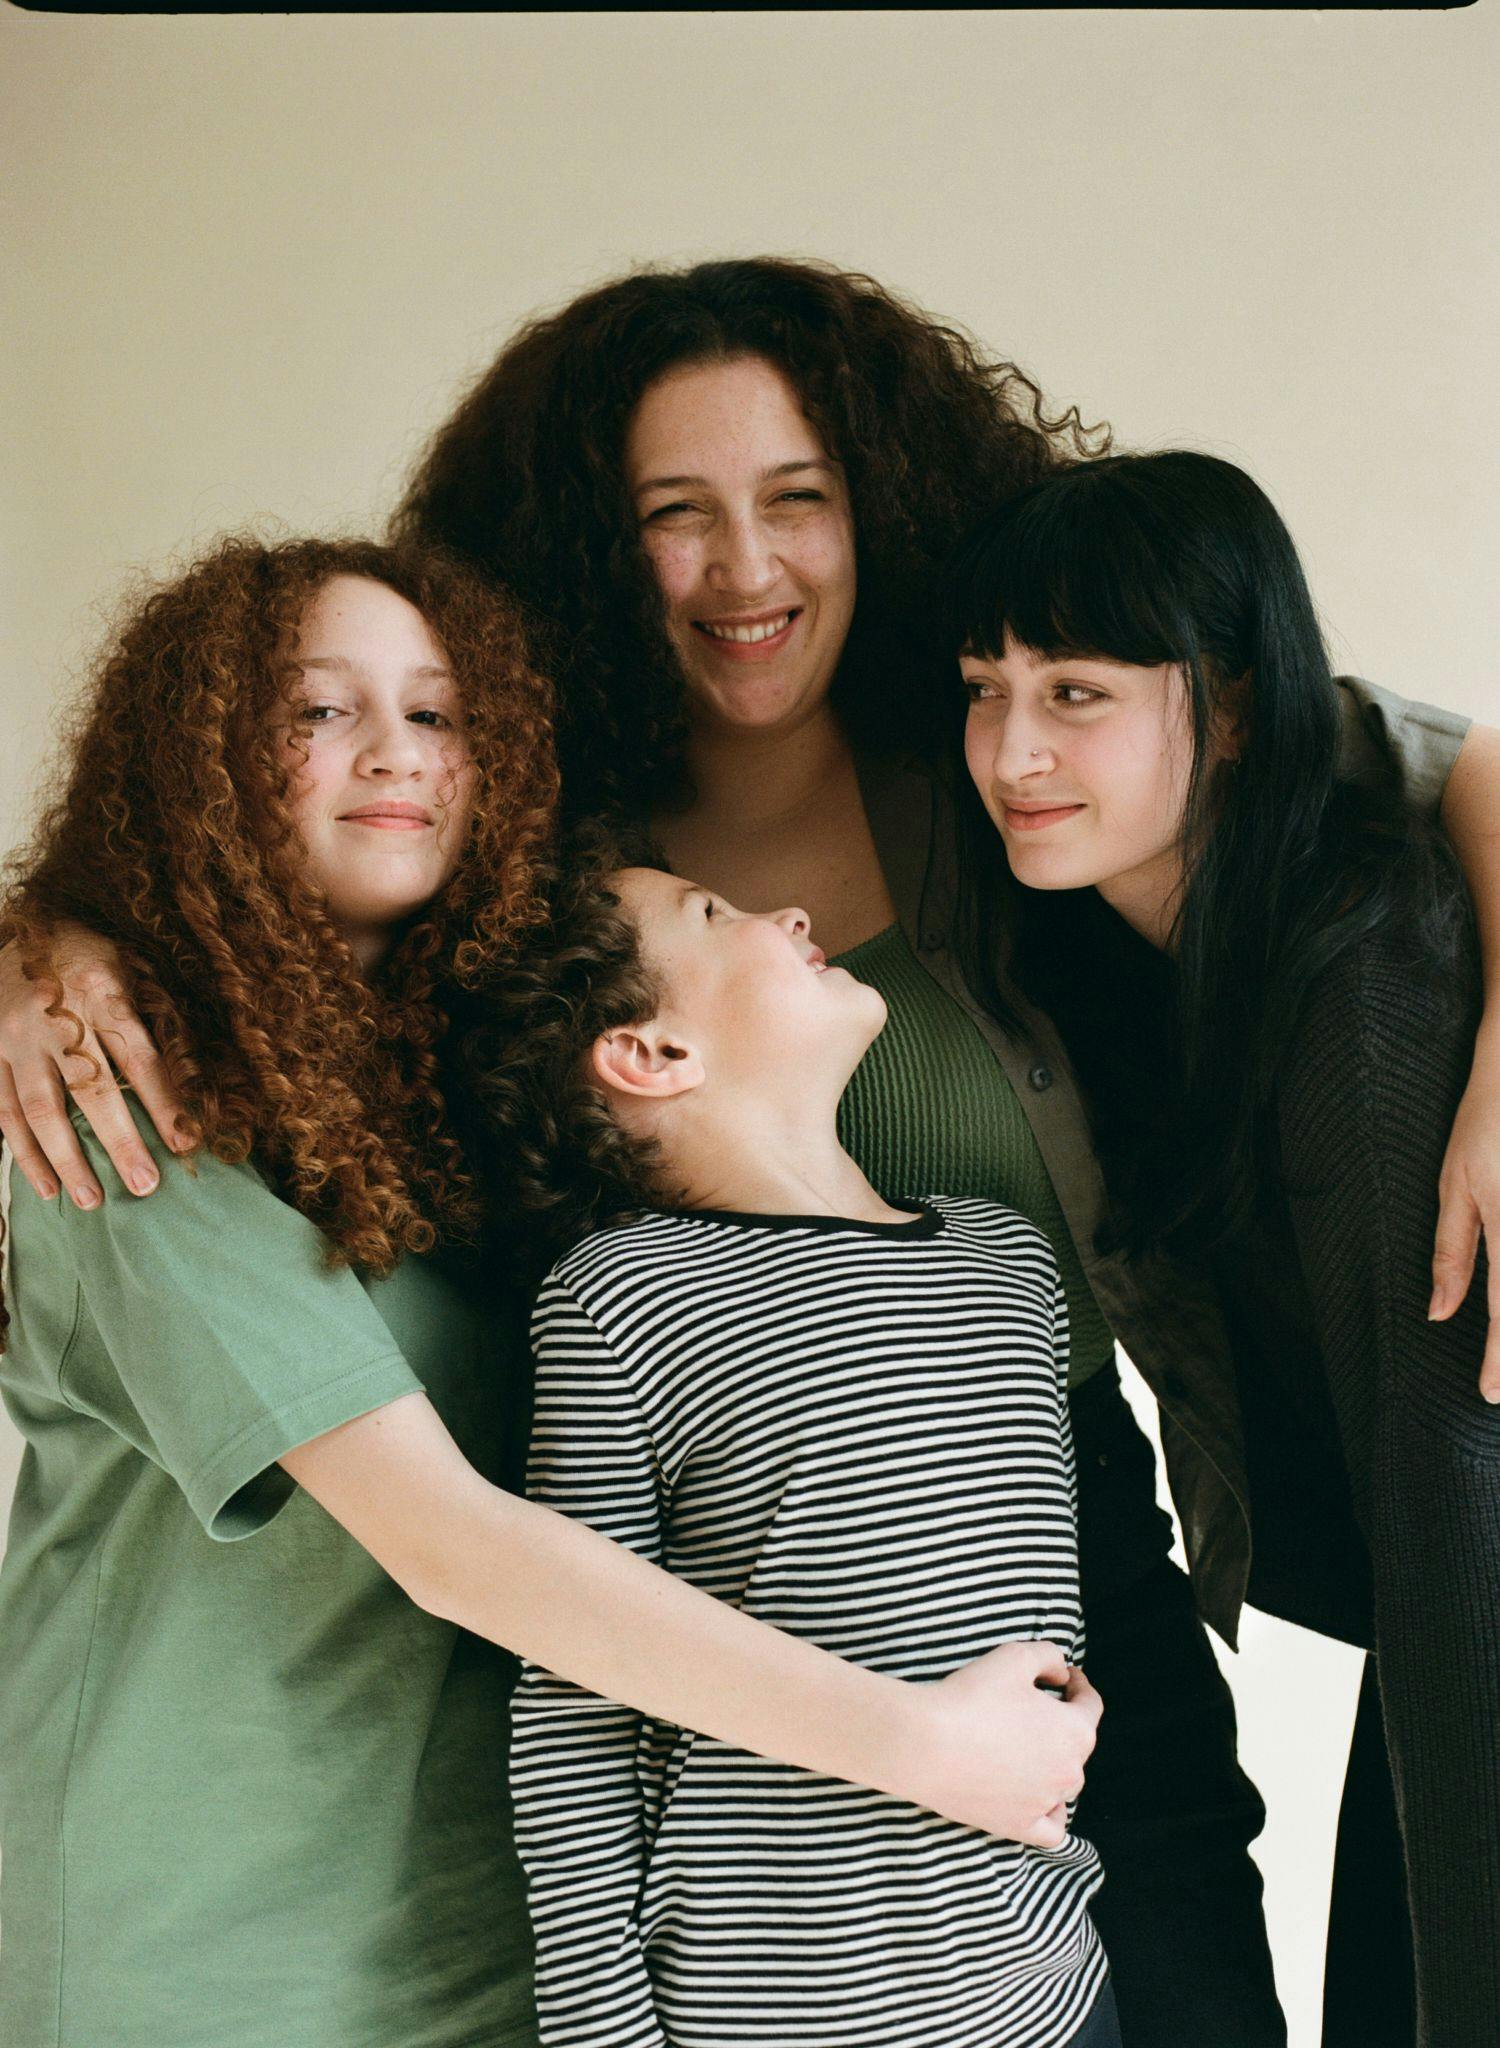 Nanci with her two teenage daughters and young son.